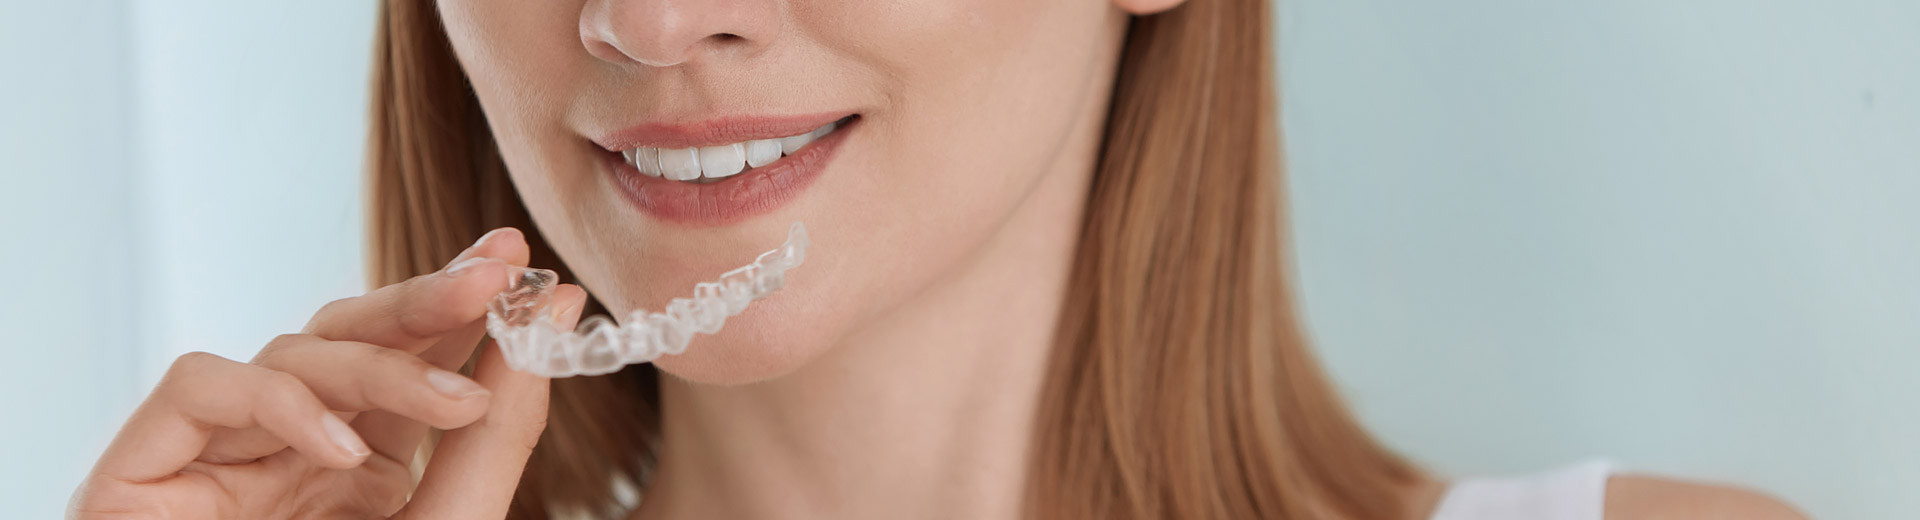 A woman is holding a Invisalign clear aligners.